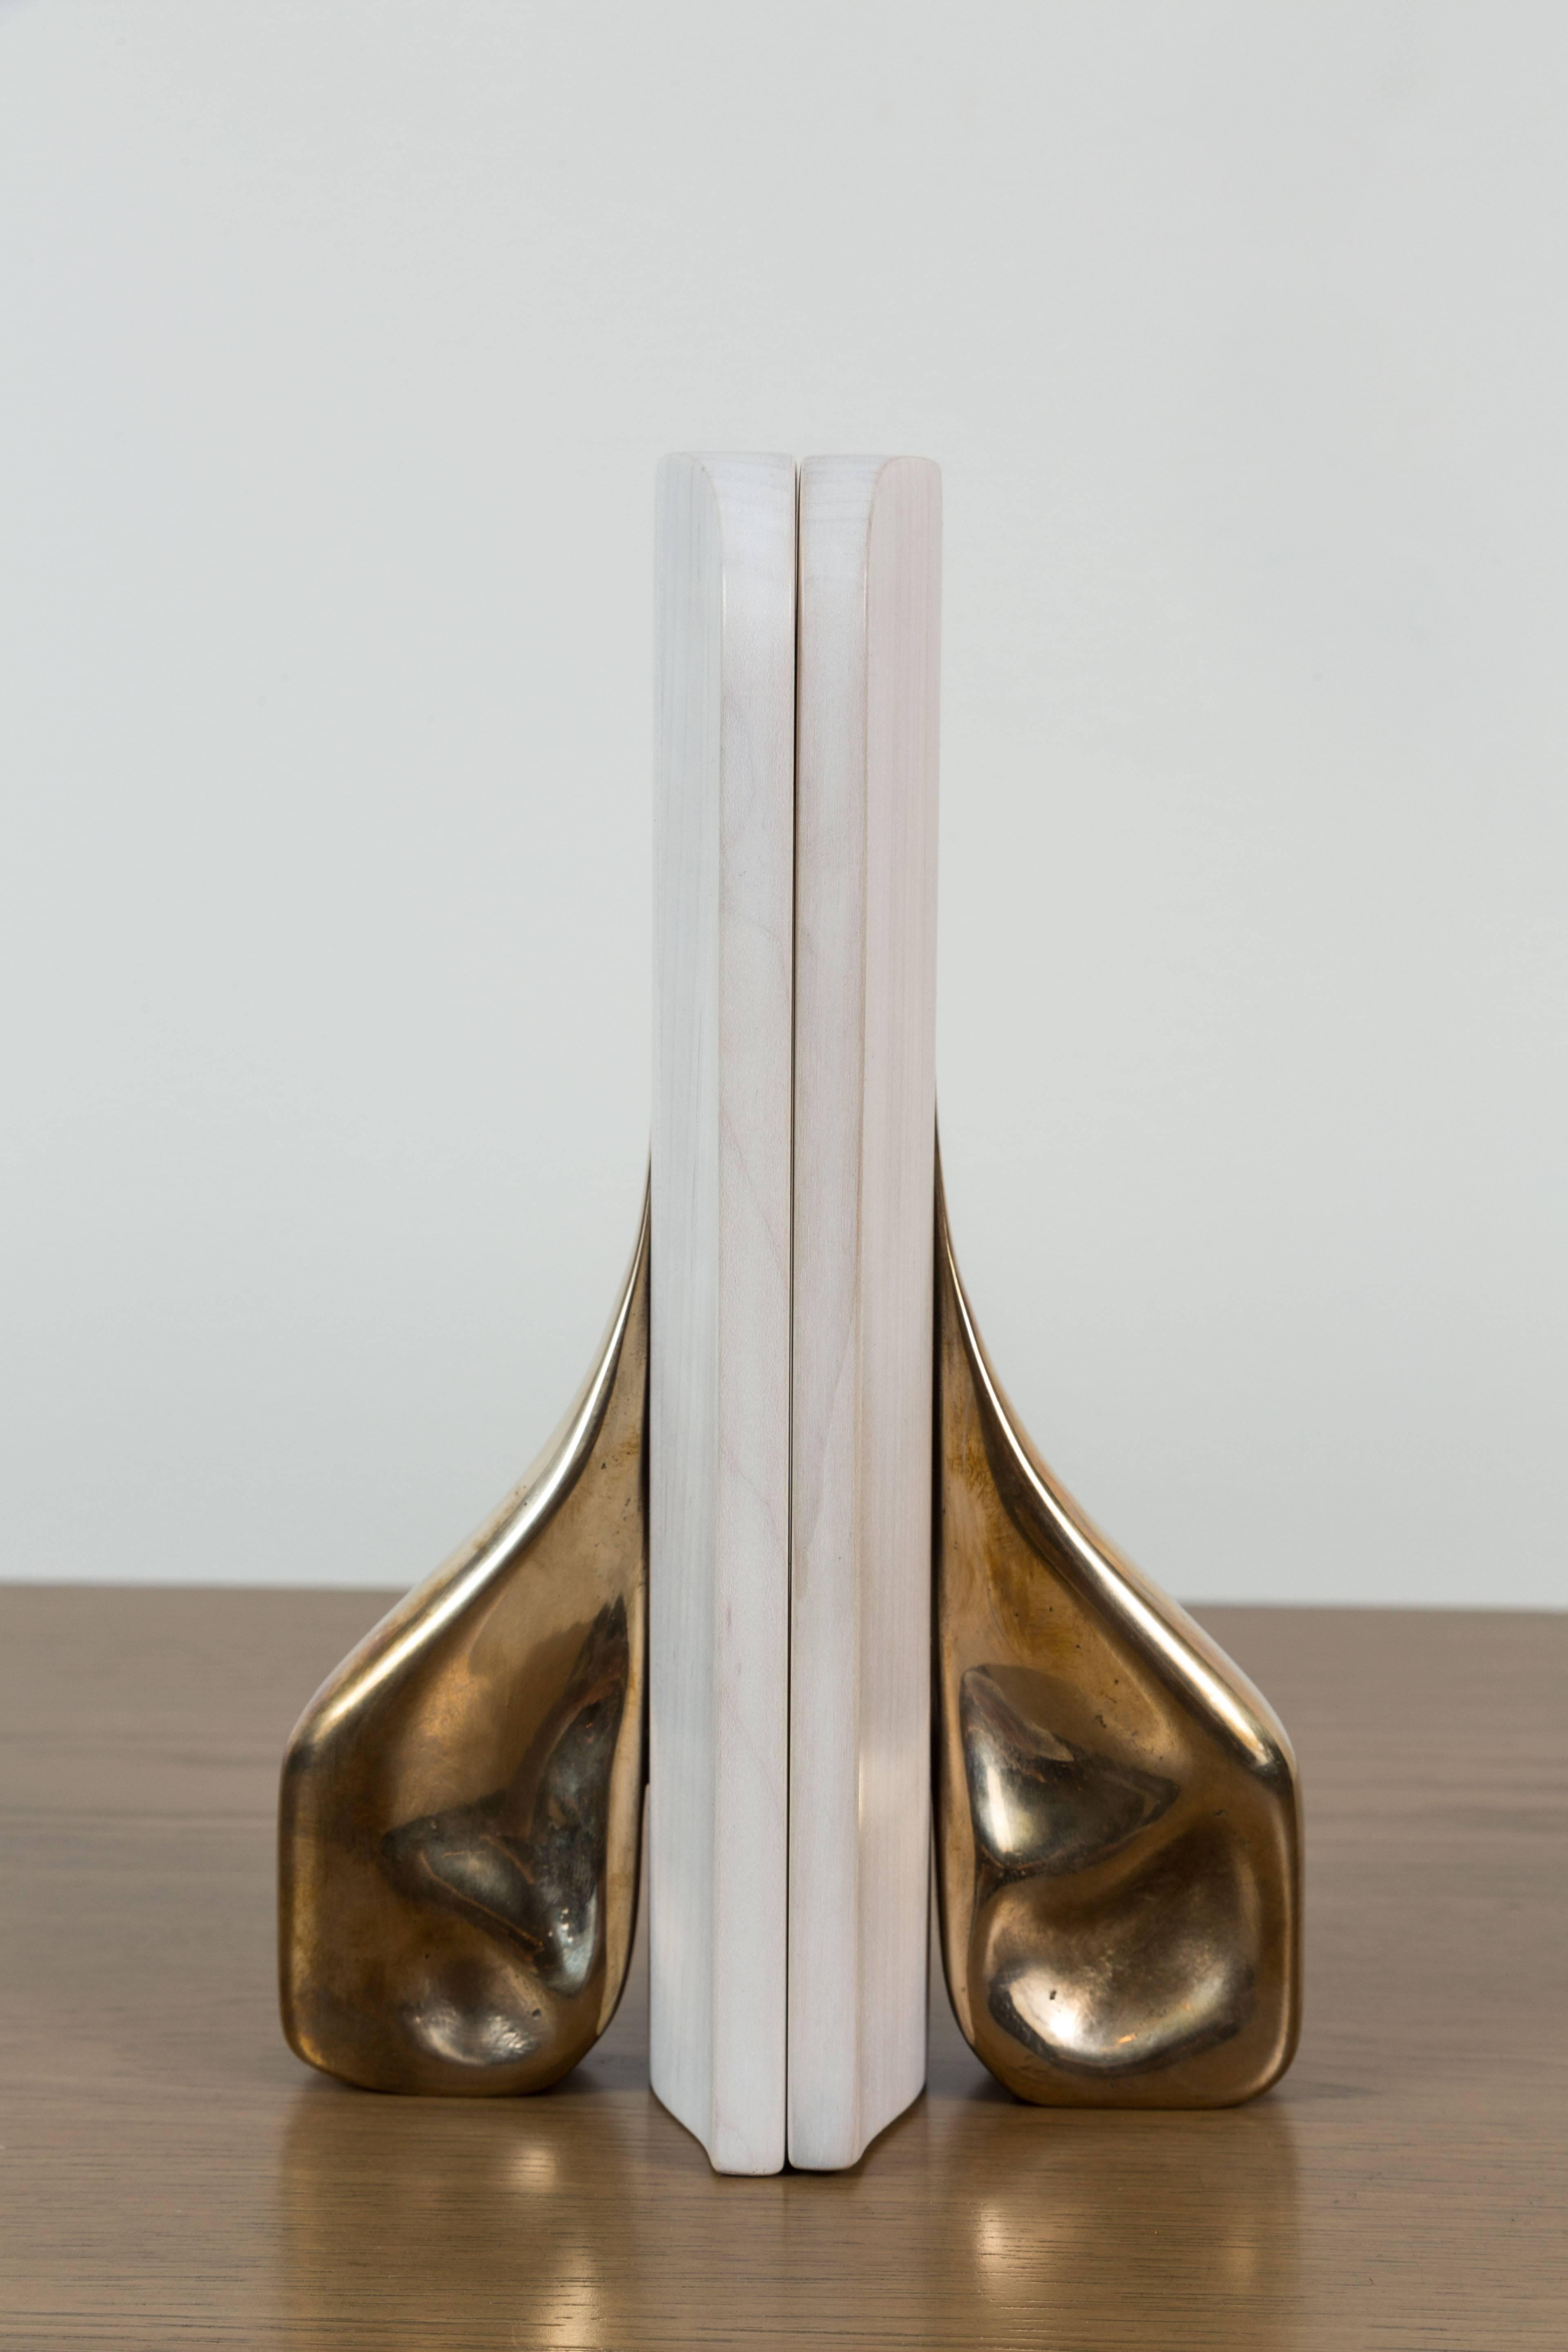 Pair of bleached Mmaple and cast bronze bookends by artist Vincent Pocsik in collaboration with Lawson-Fenning. Made of natural materials, this decorative object can be accessorized on table top, book shelf, or desk to achieve an organic modern